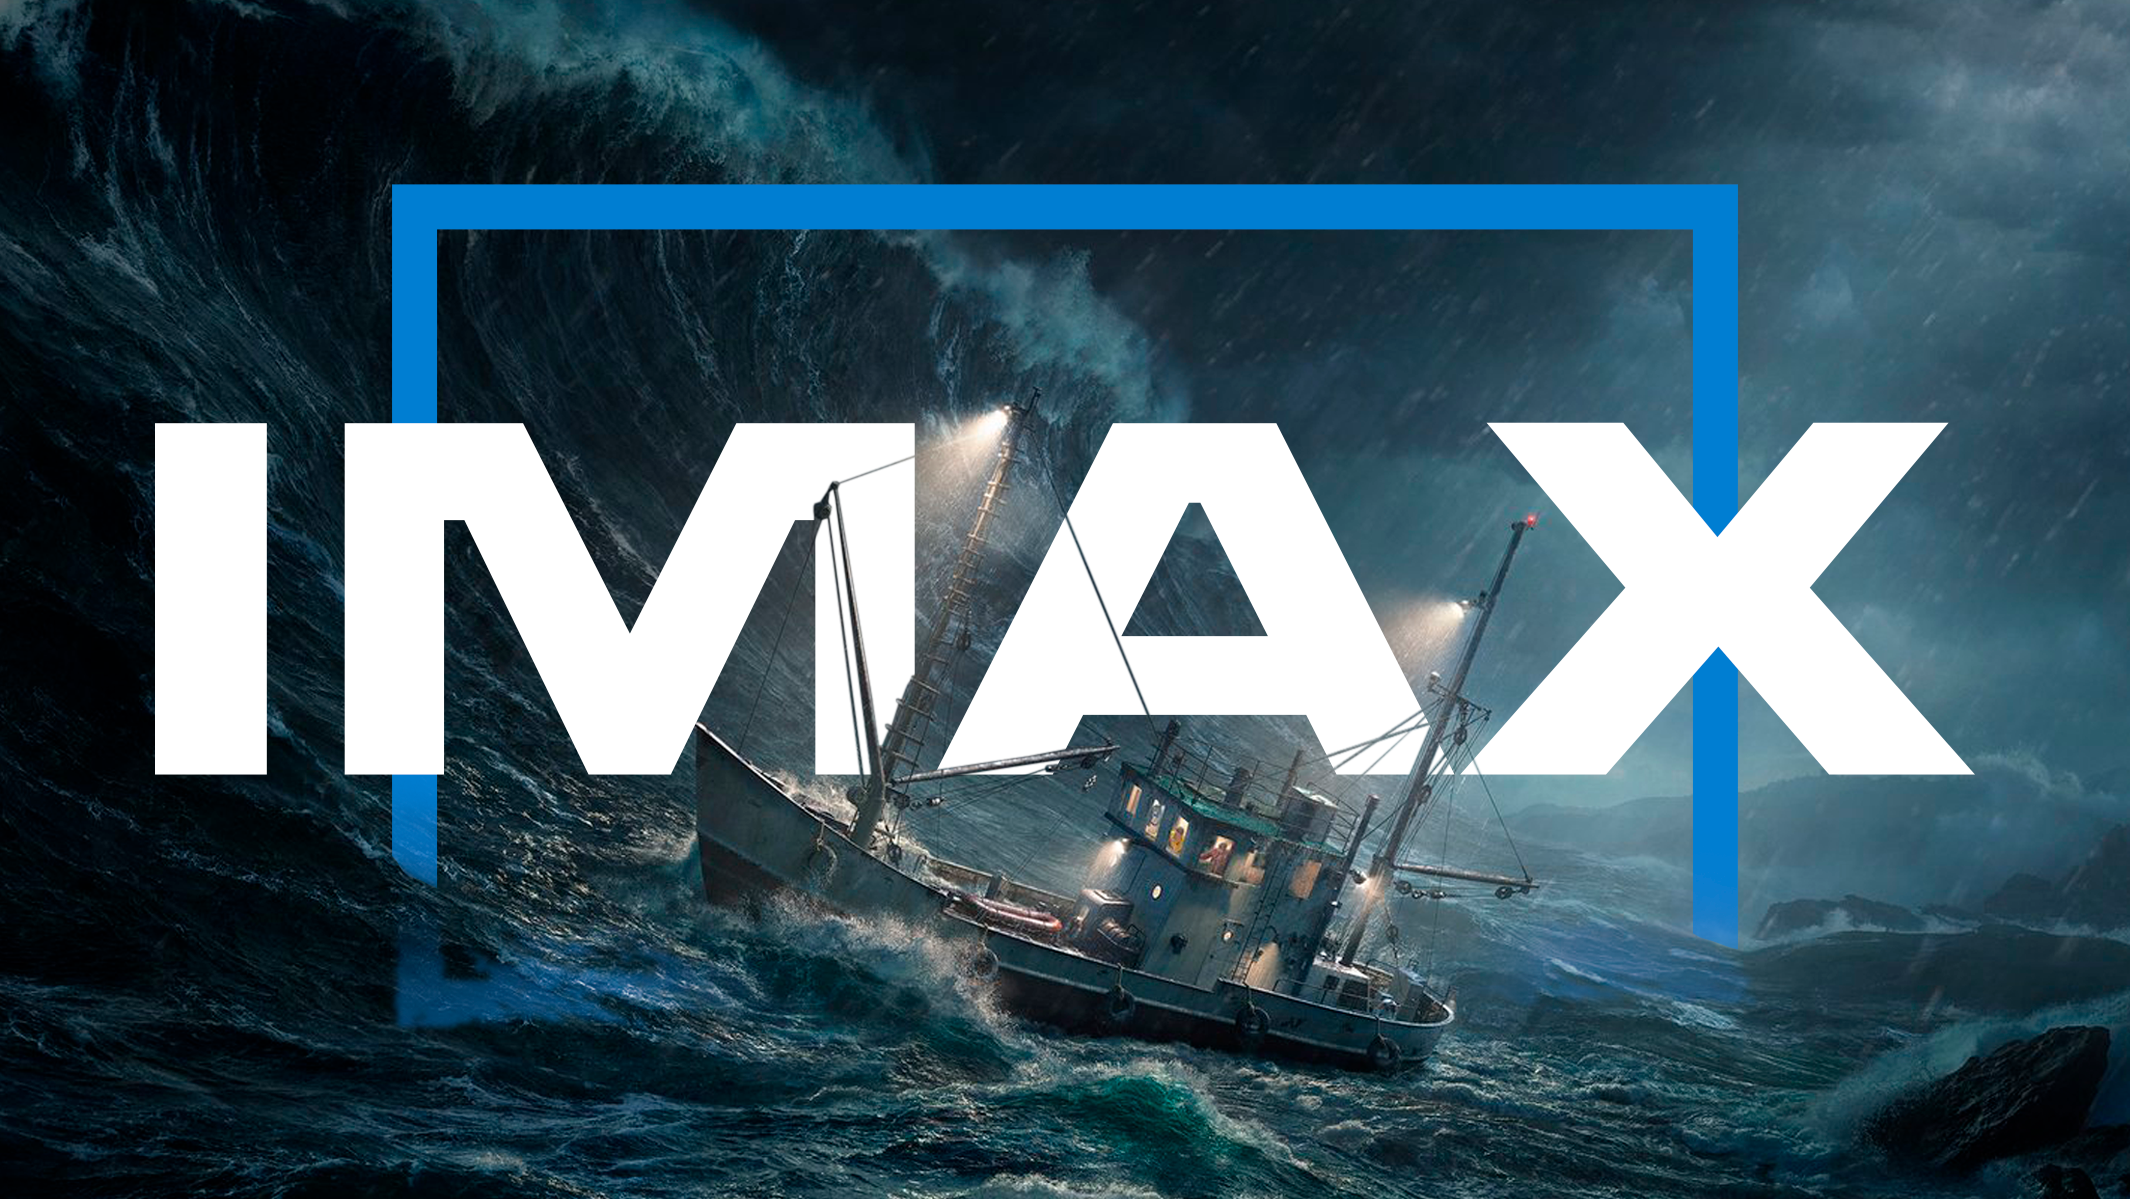 IMAX in partnership with TBWA&#92Chiat&#92Day LA